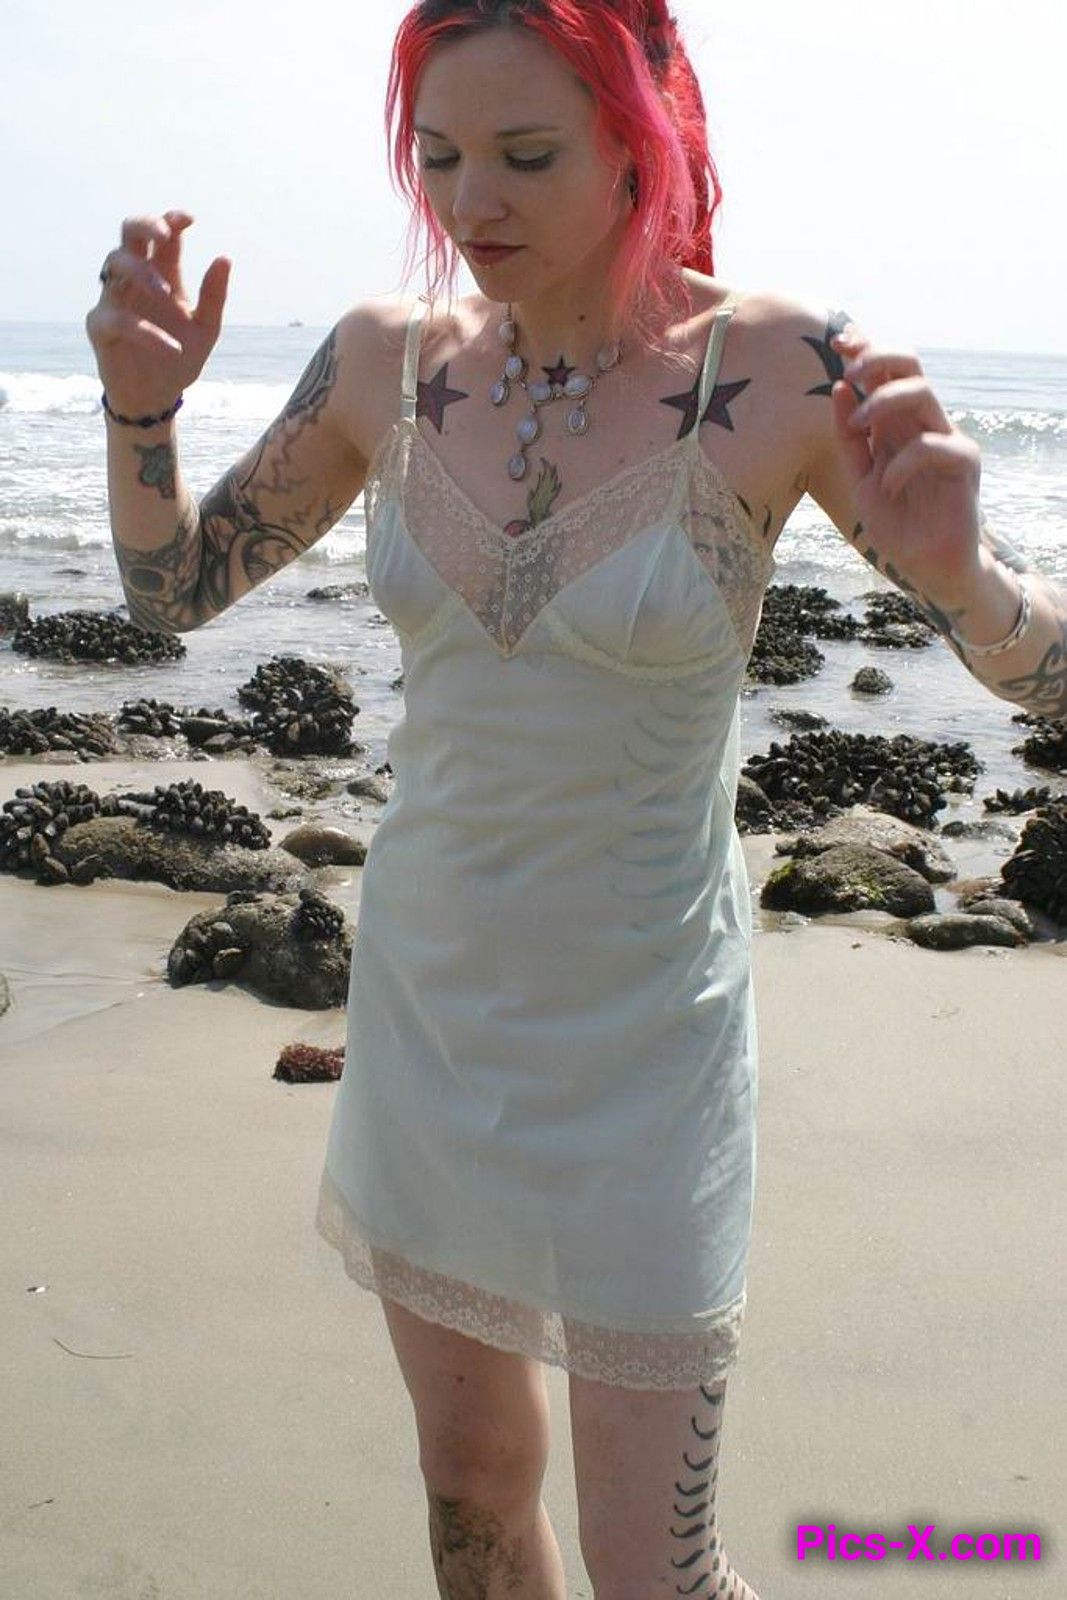 Inked up goth girl playing in the waves at a beach - Punk Rock Girlfriend - Image 16